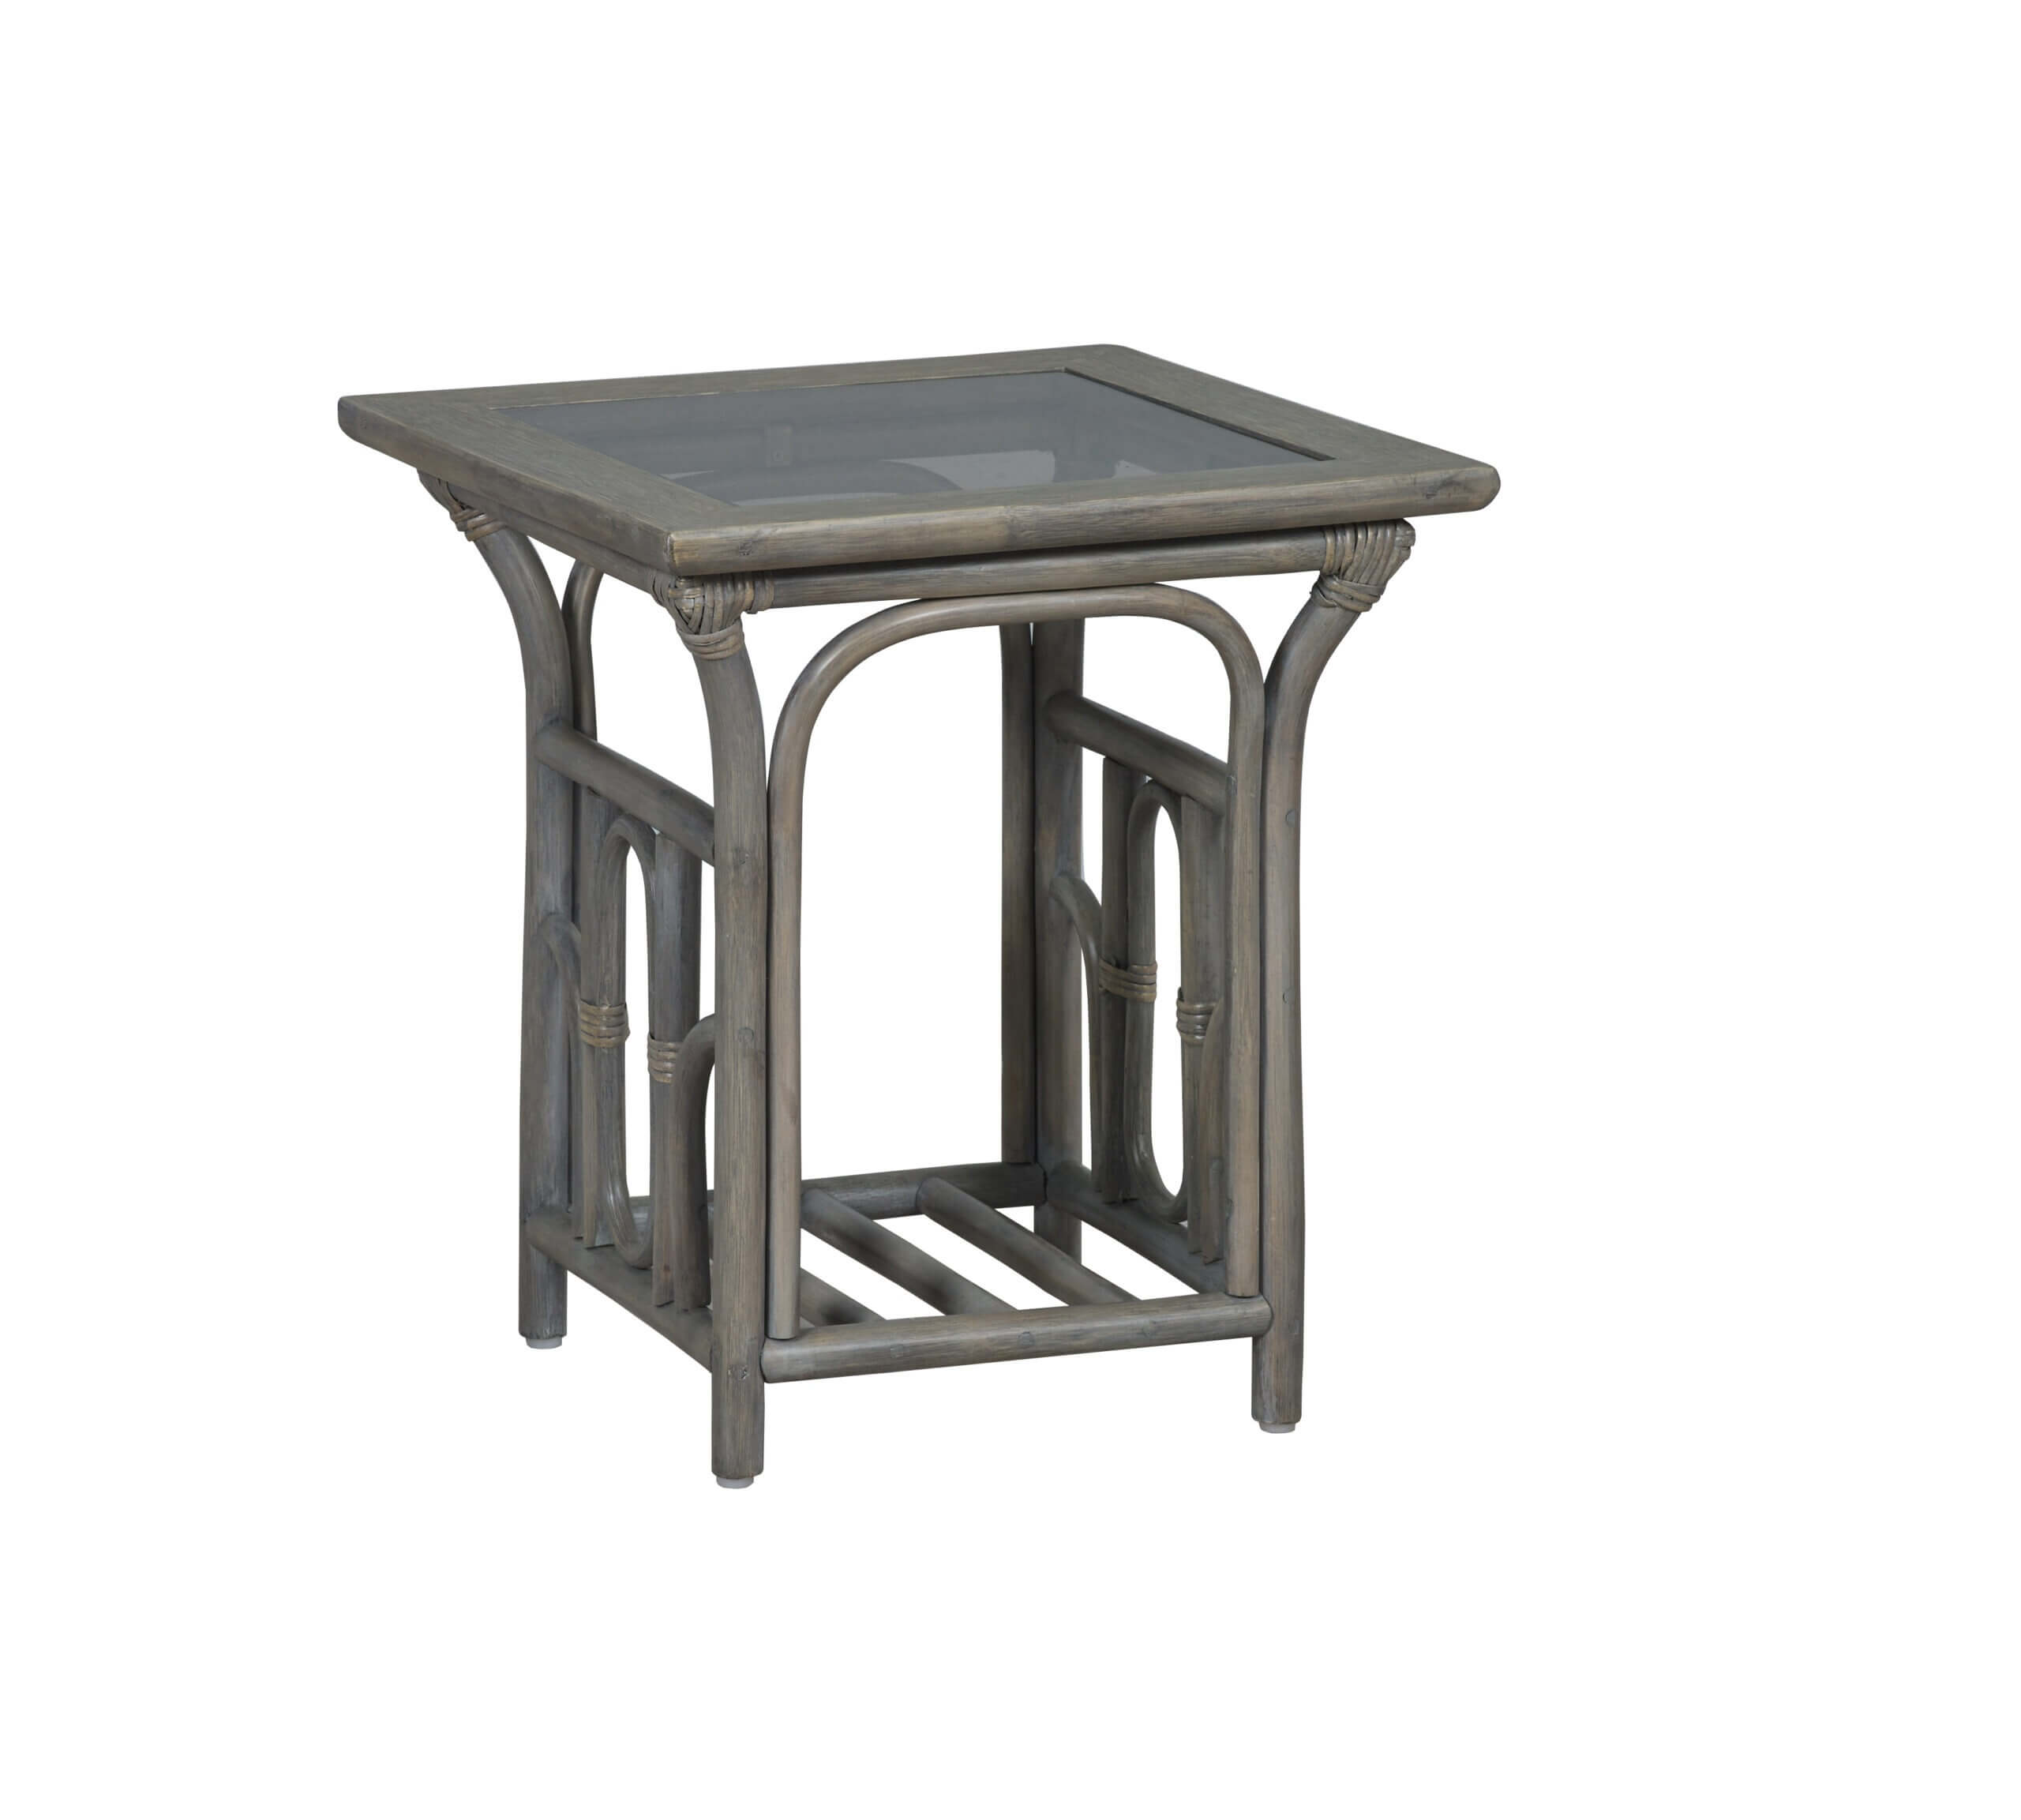 Showing image for Lupo side table